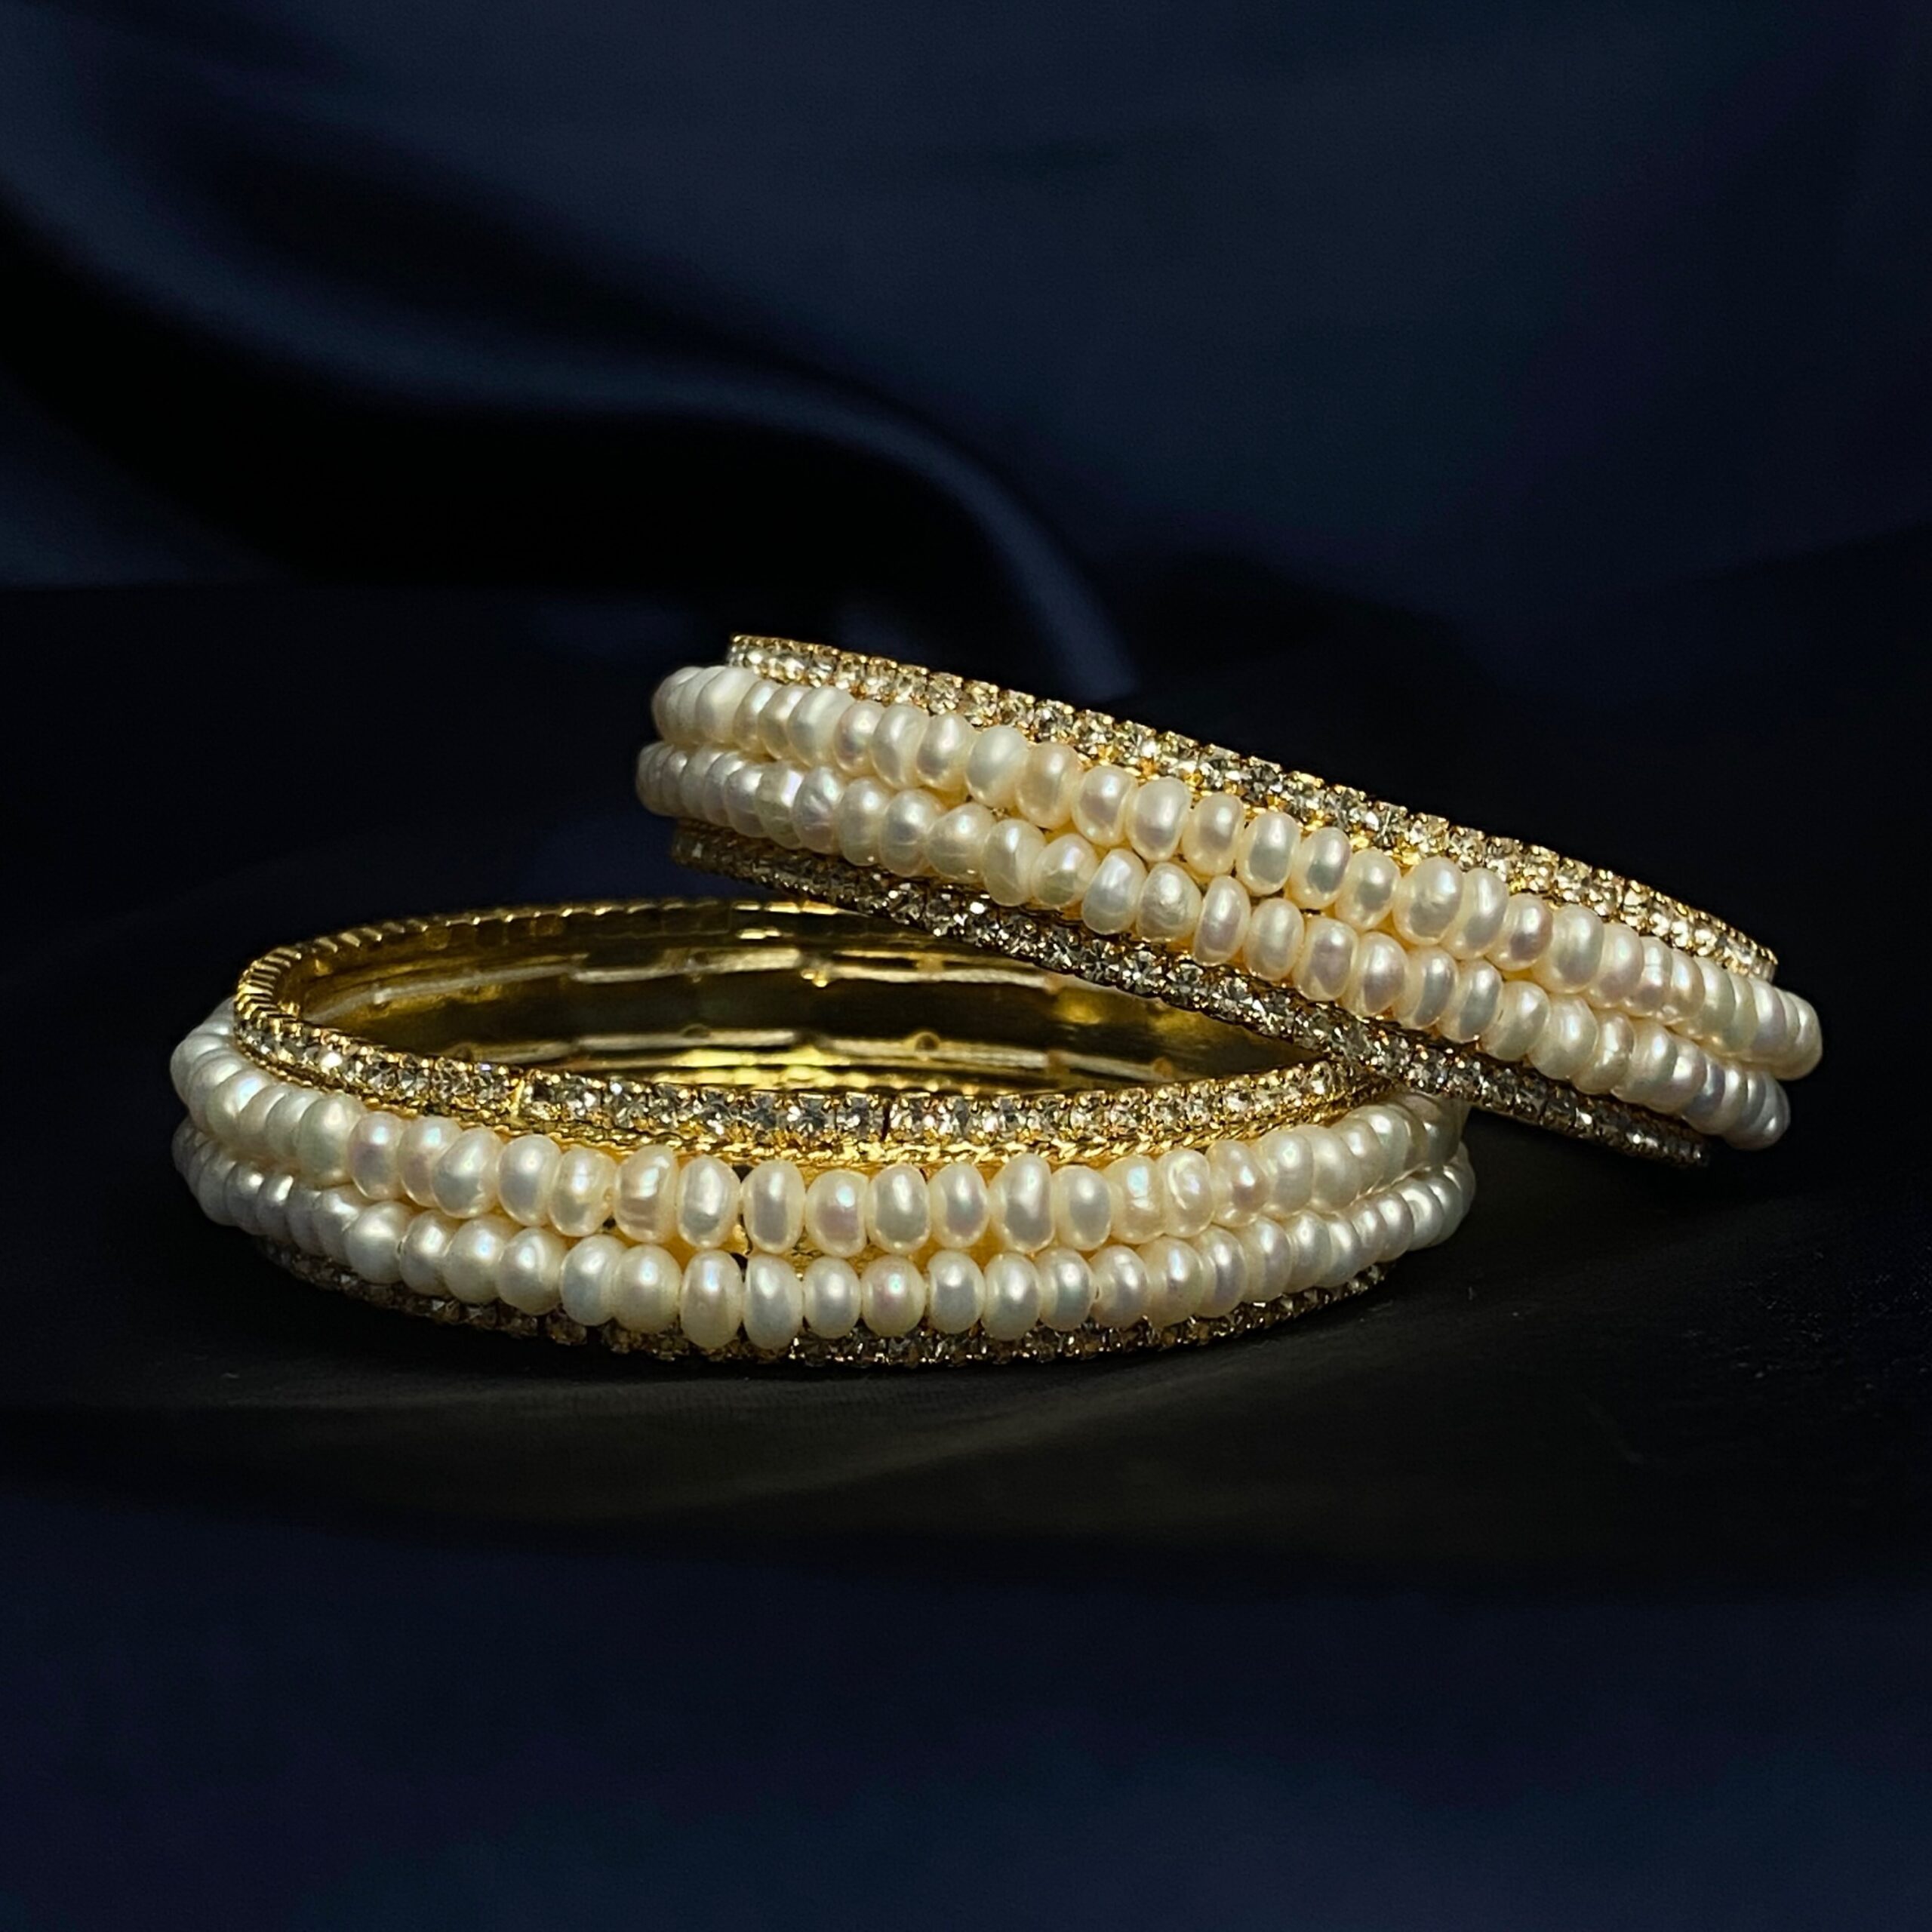 Breathtaking Pearl Bangles With 2.5mm Semi-round White Pearls & ADs